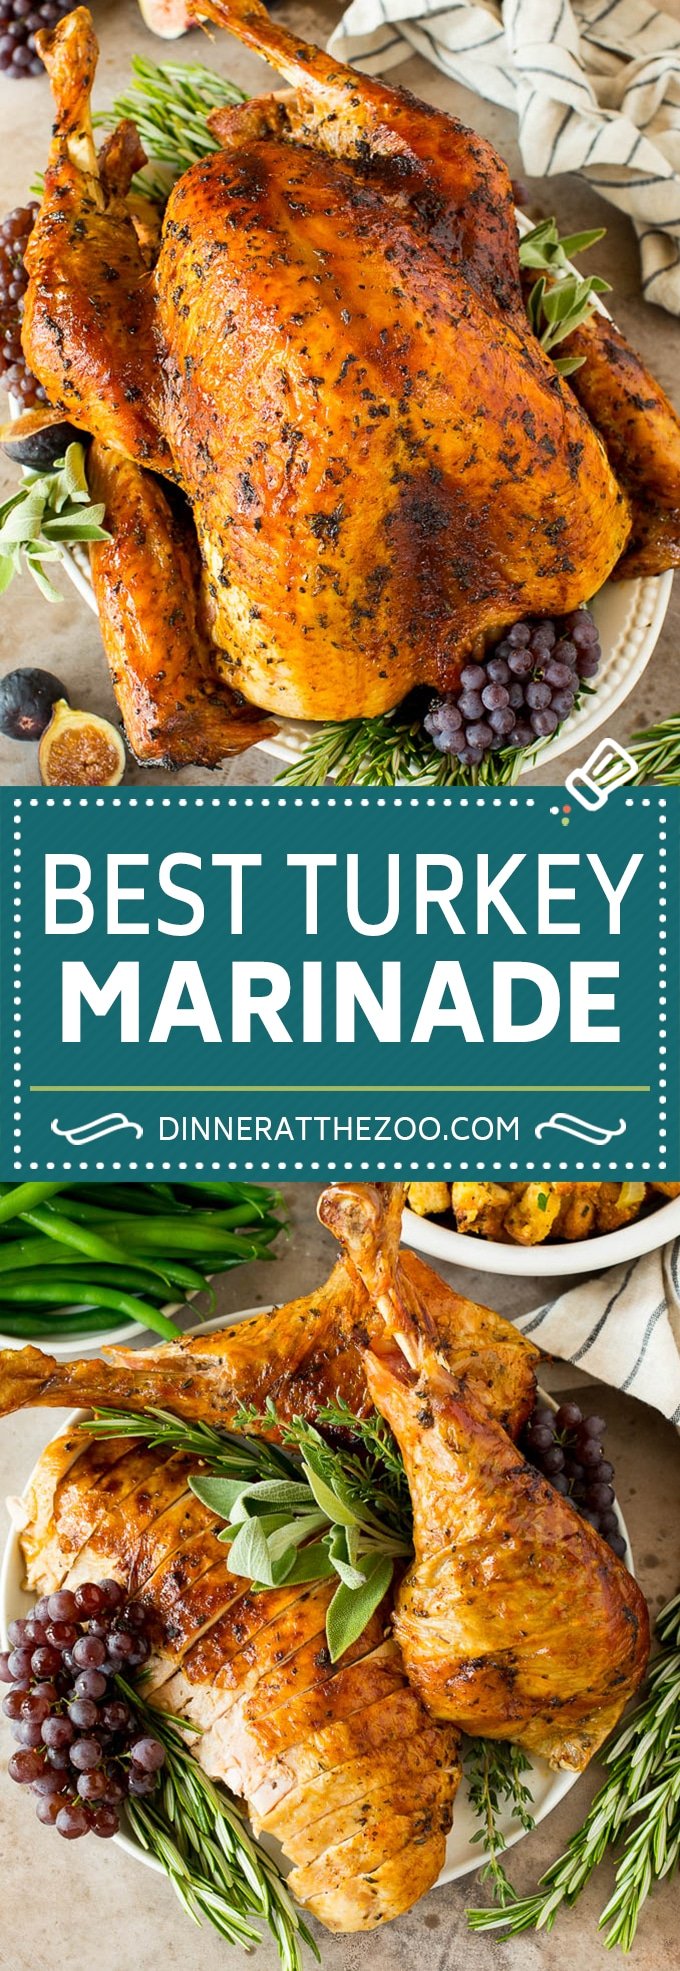 This turkey marinade is a combination of olive oil, fresh herbs, spices and citrus, all blended together to make the most tender and juicy turkey ever!